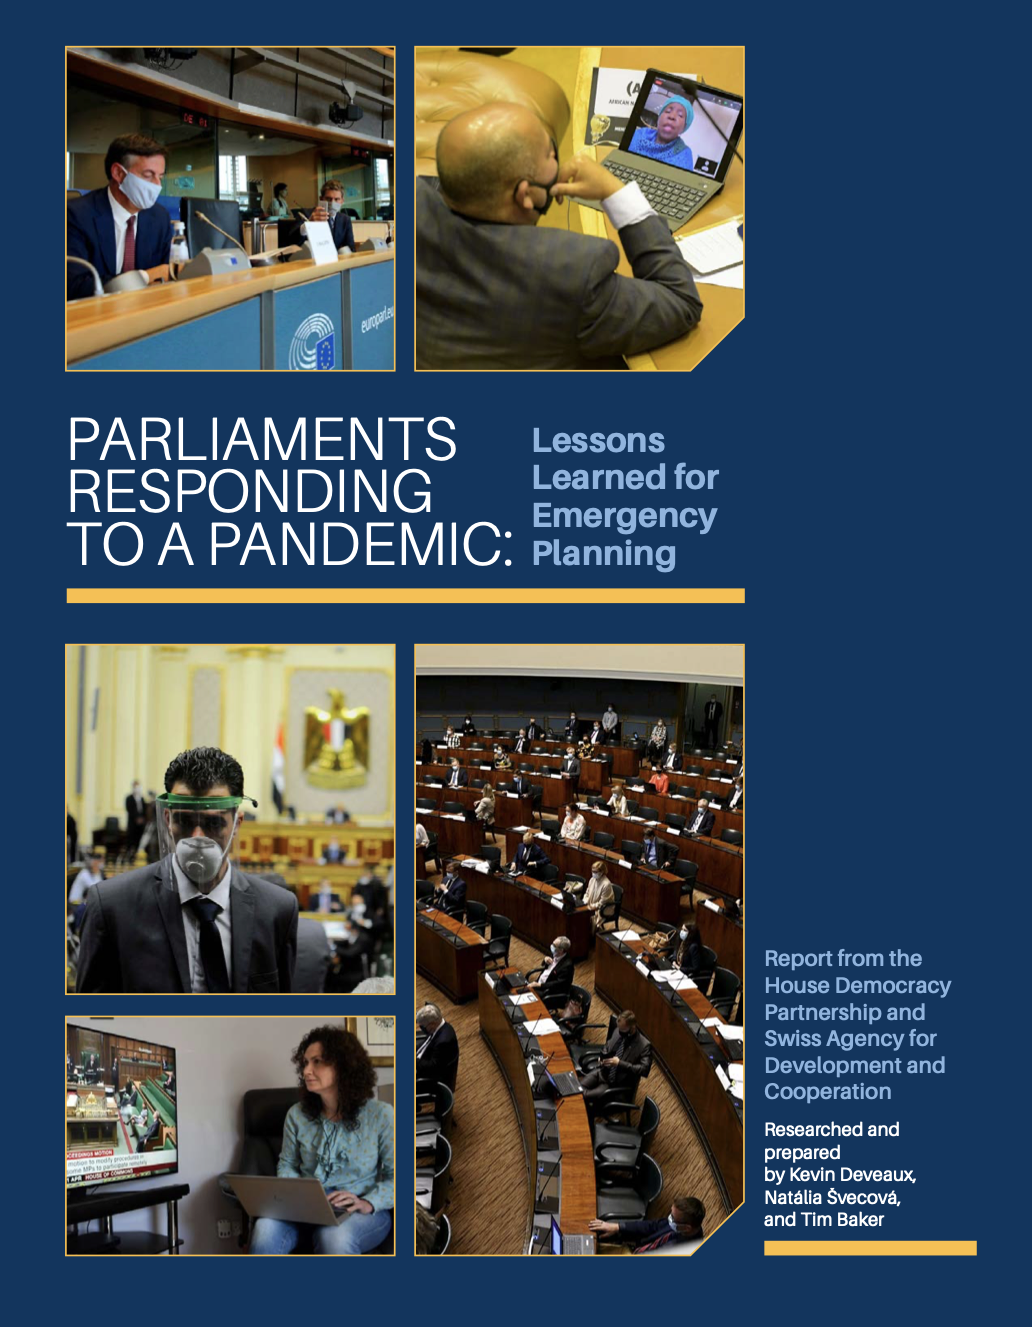 PARLIAMENT’S ROLE IN EMERGENCY FISCAL POLICY: Lessons Learned for Emergency Planning